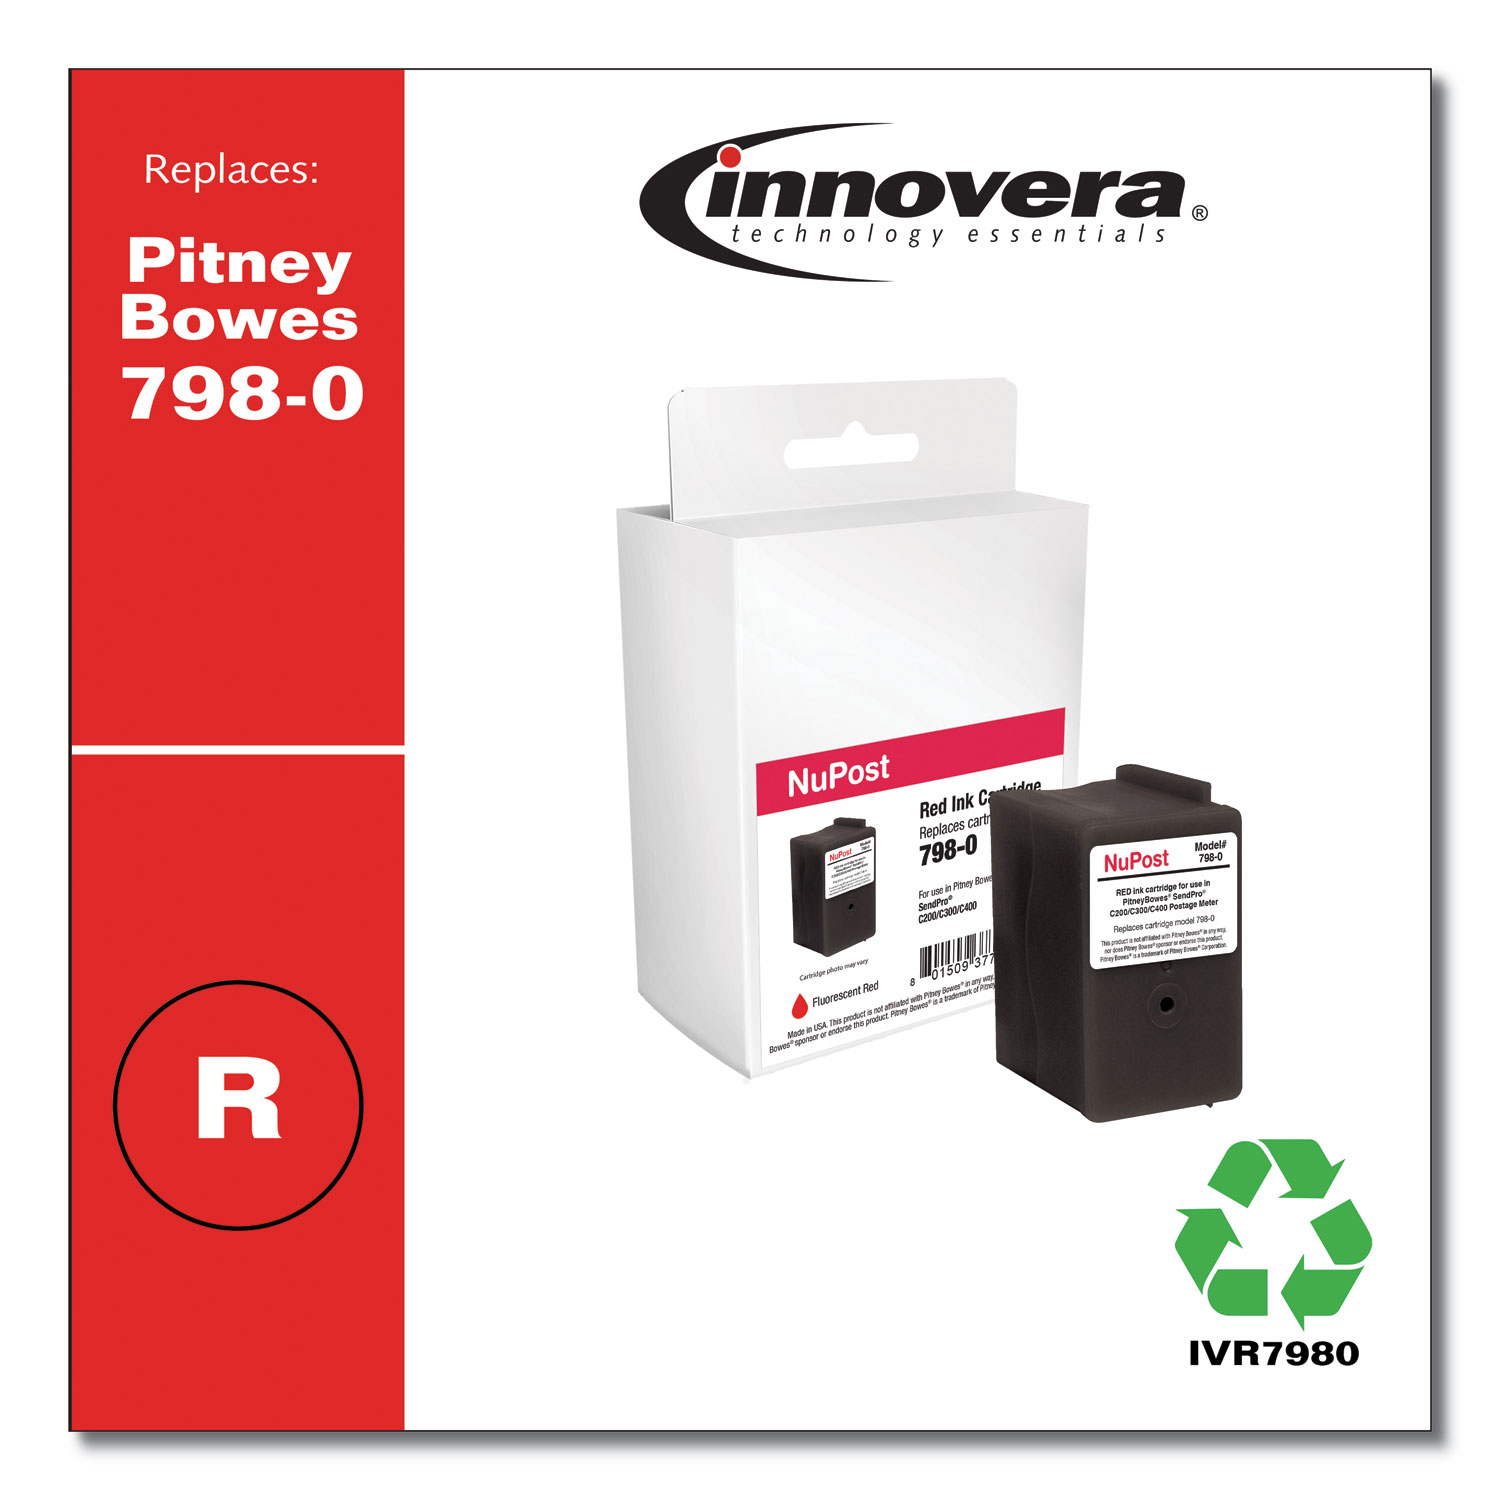  Innovera IVR7980 Compatible Red Postage Meter Ink, Replacement for Pitney Bowes 798-0 (SL-798-0), 1,500 Page-Yield (IVR7980) 